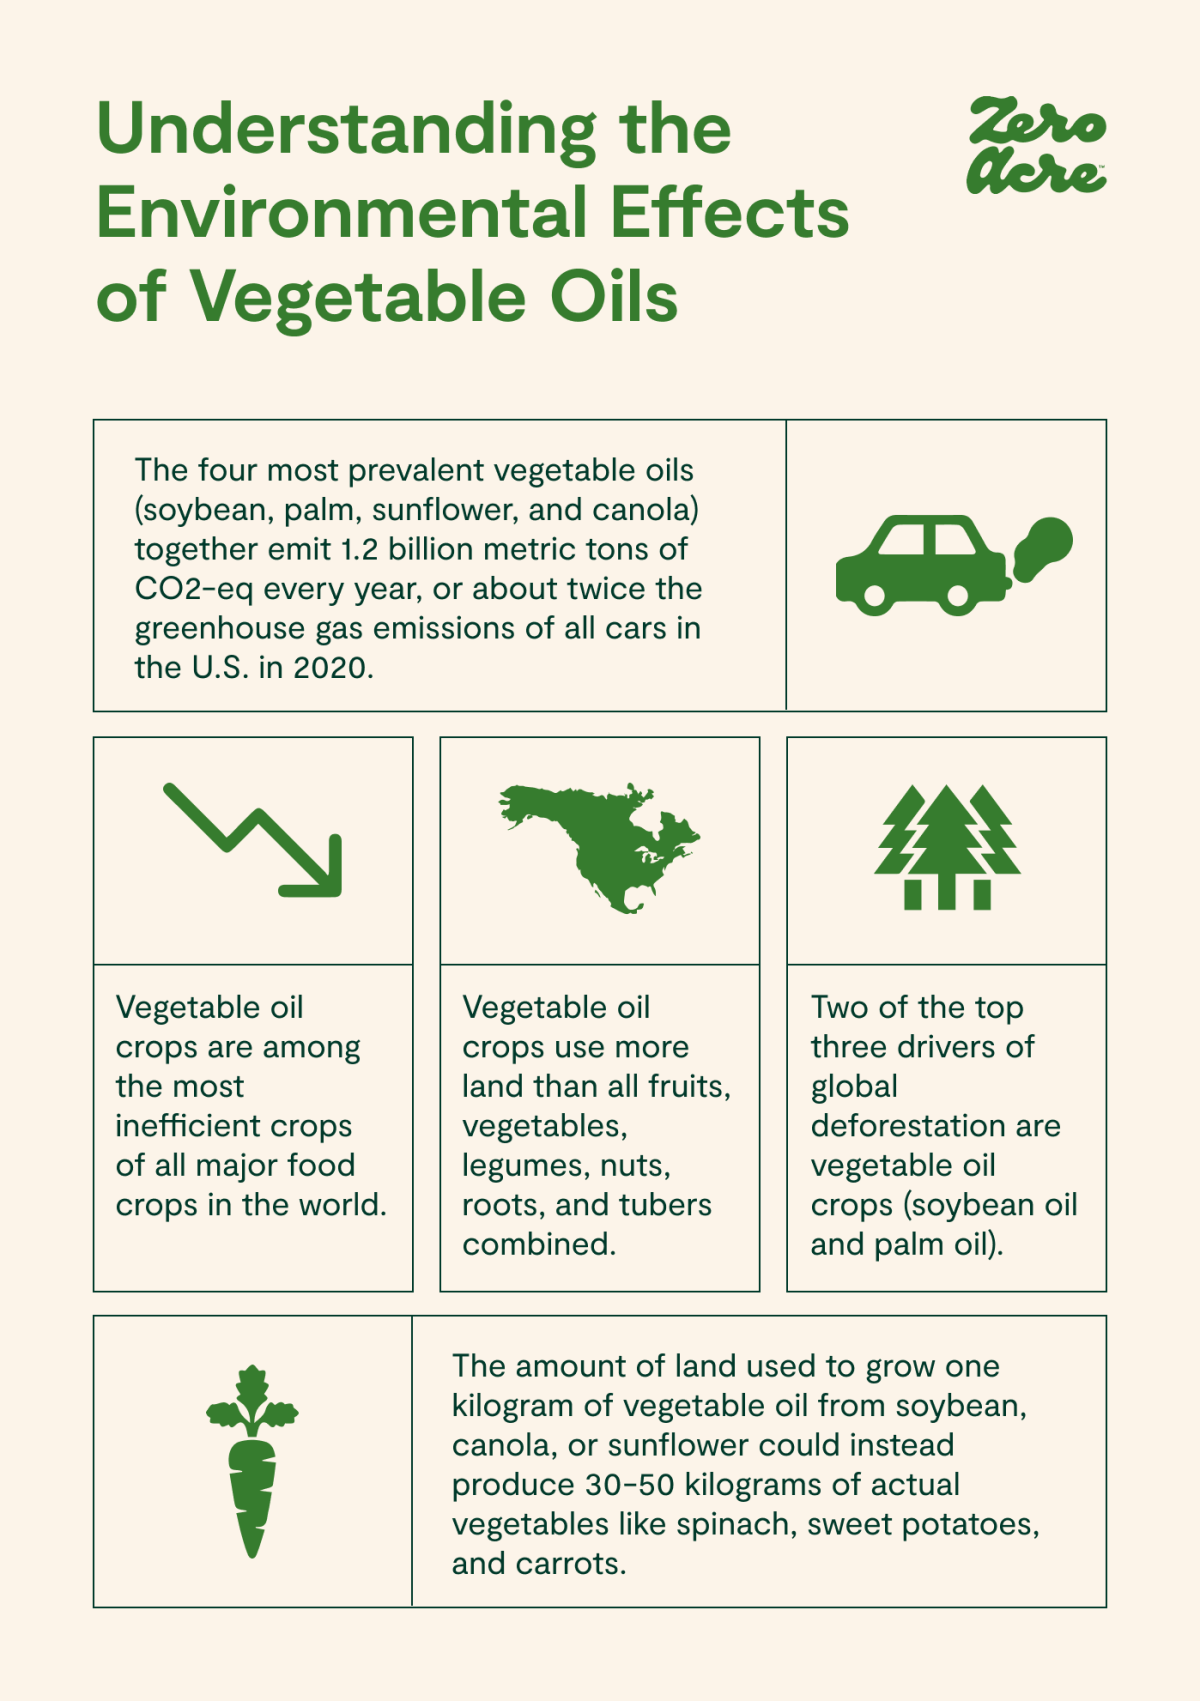 Area of land needed to produce one tonne of vegetable oil, World, 2020